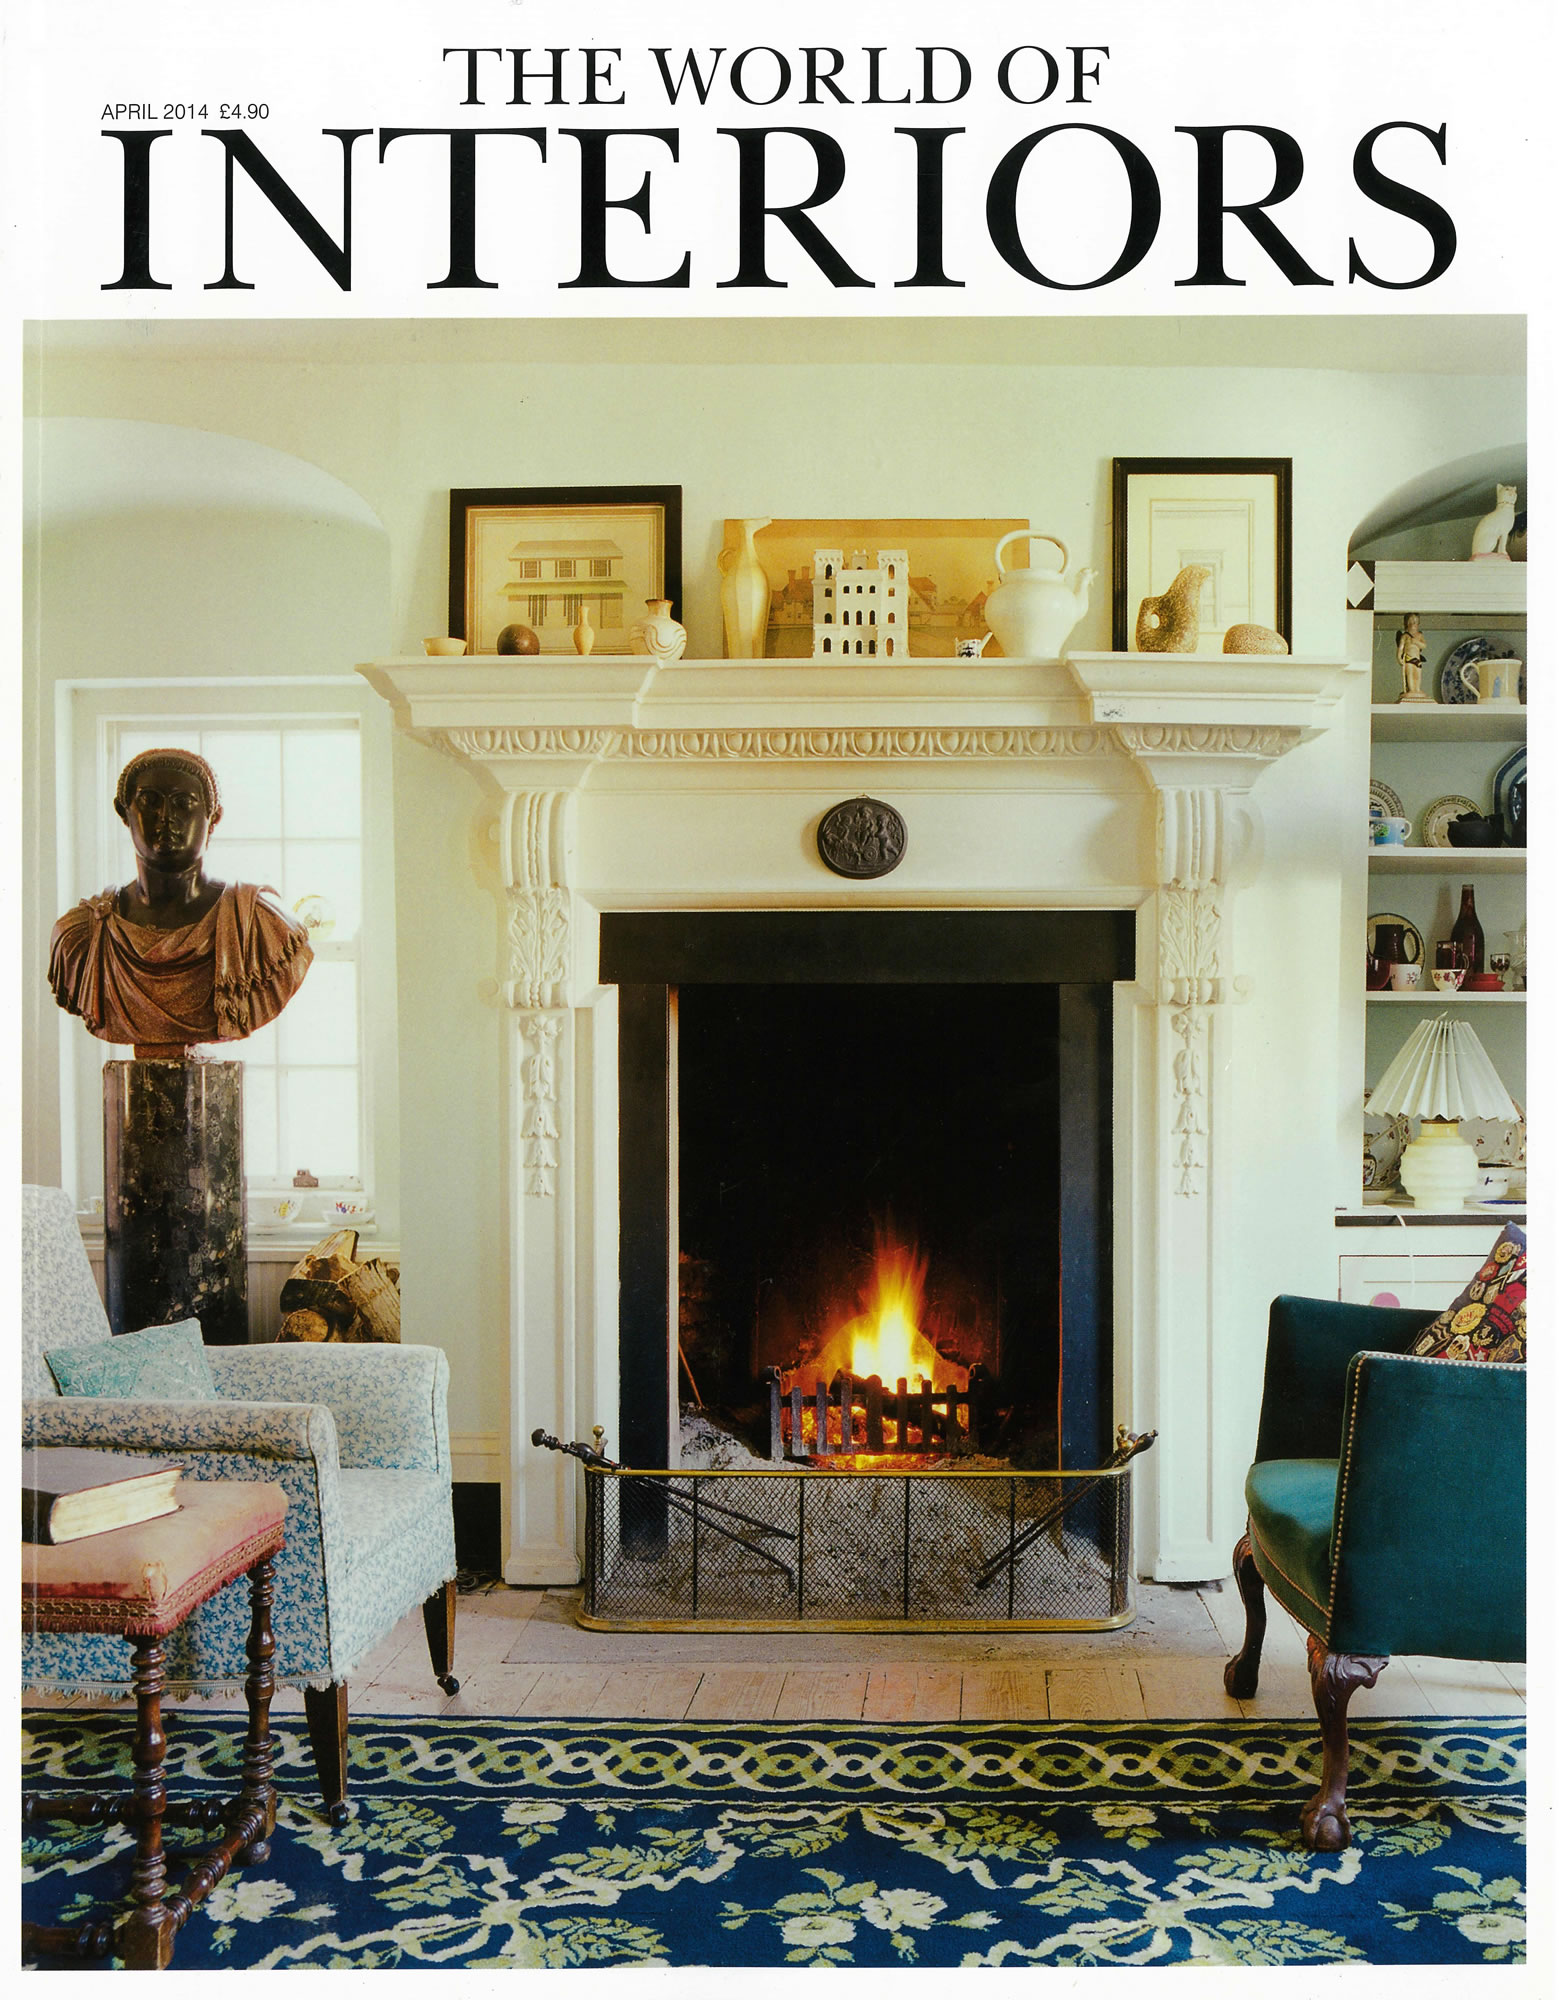 The World of Interiors FP April 2014